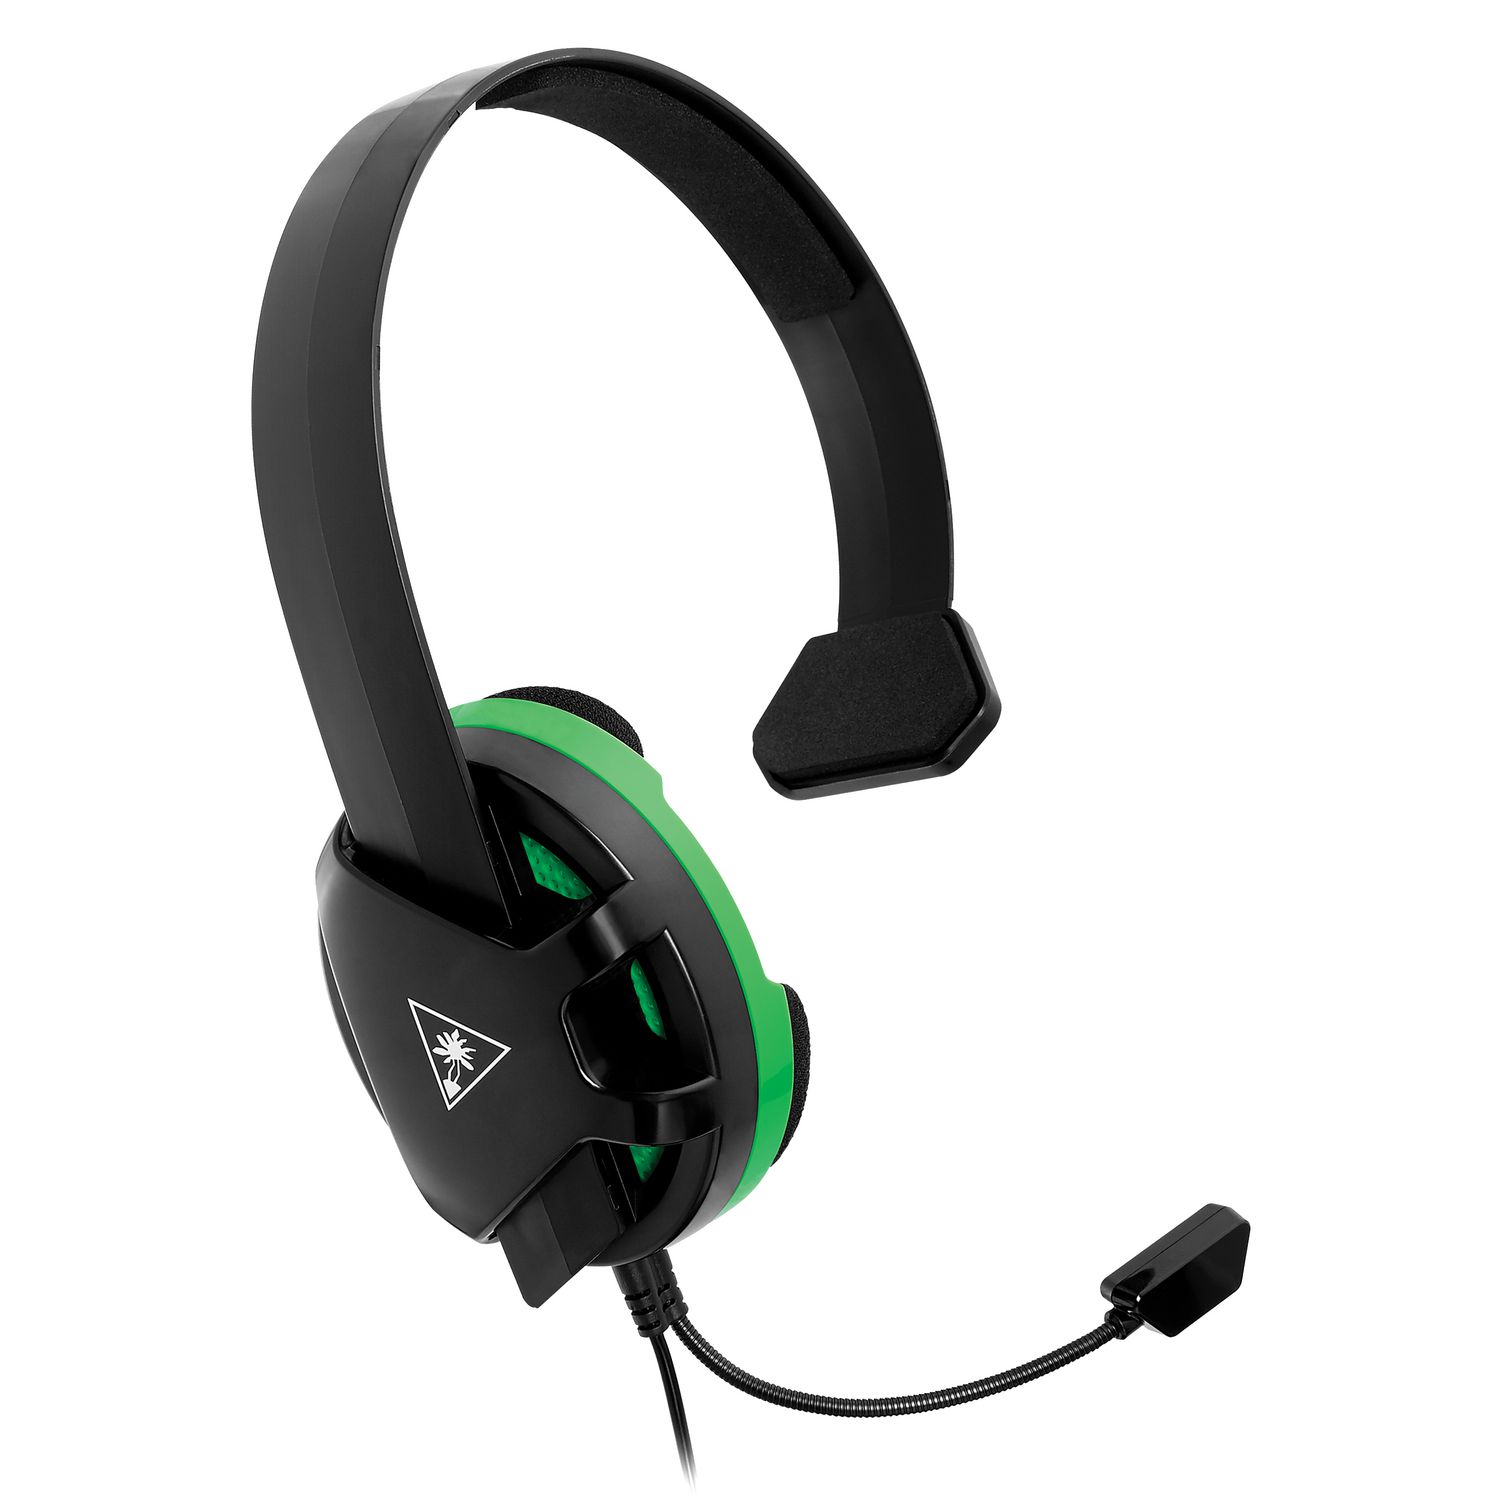 Casque XBox One Turtle Beach - Exclu web – Matos and Games